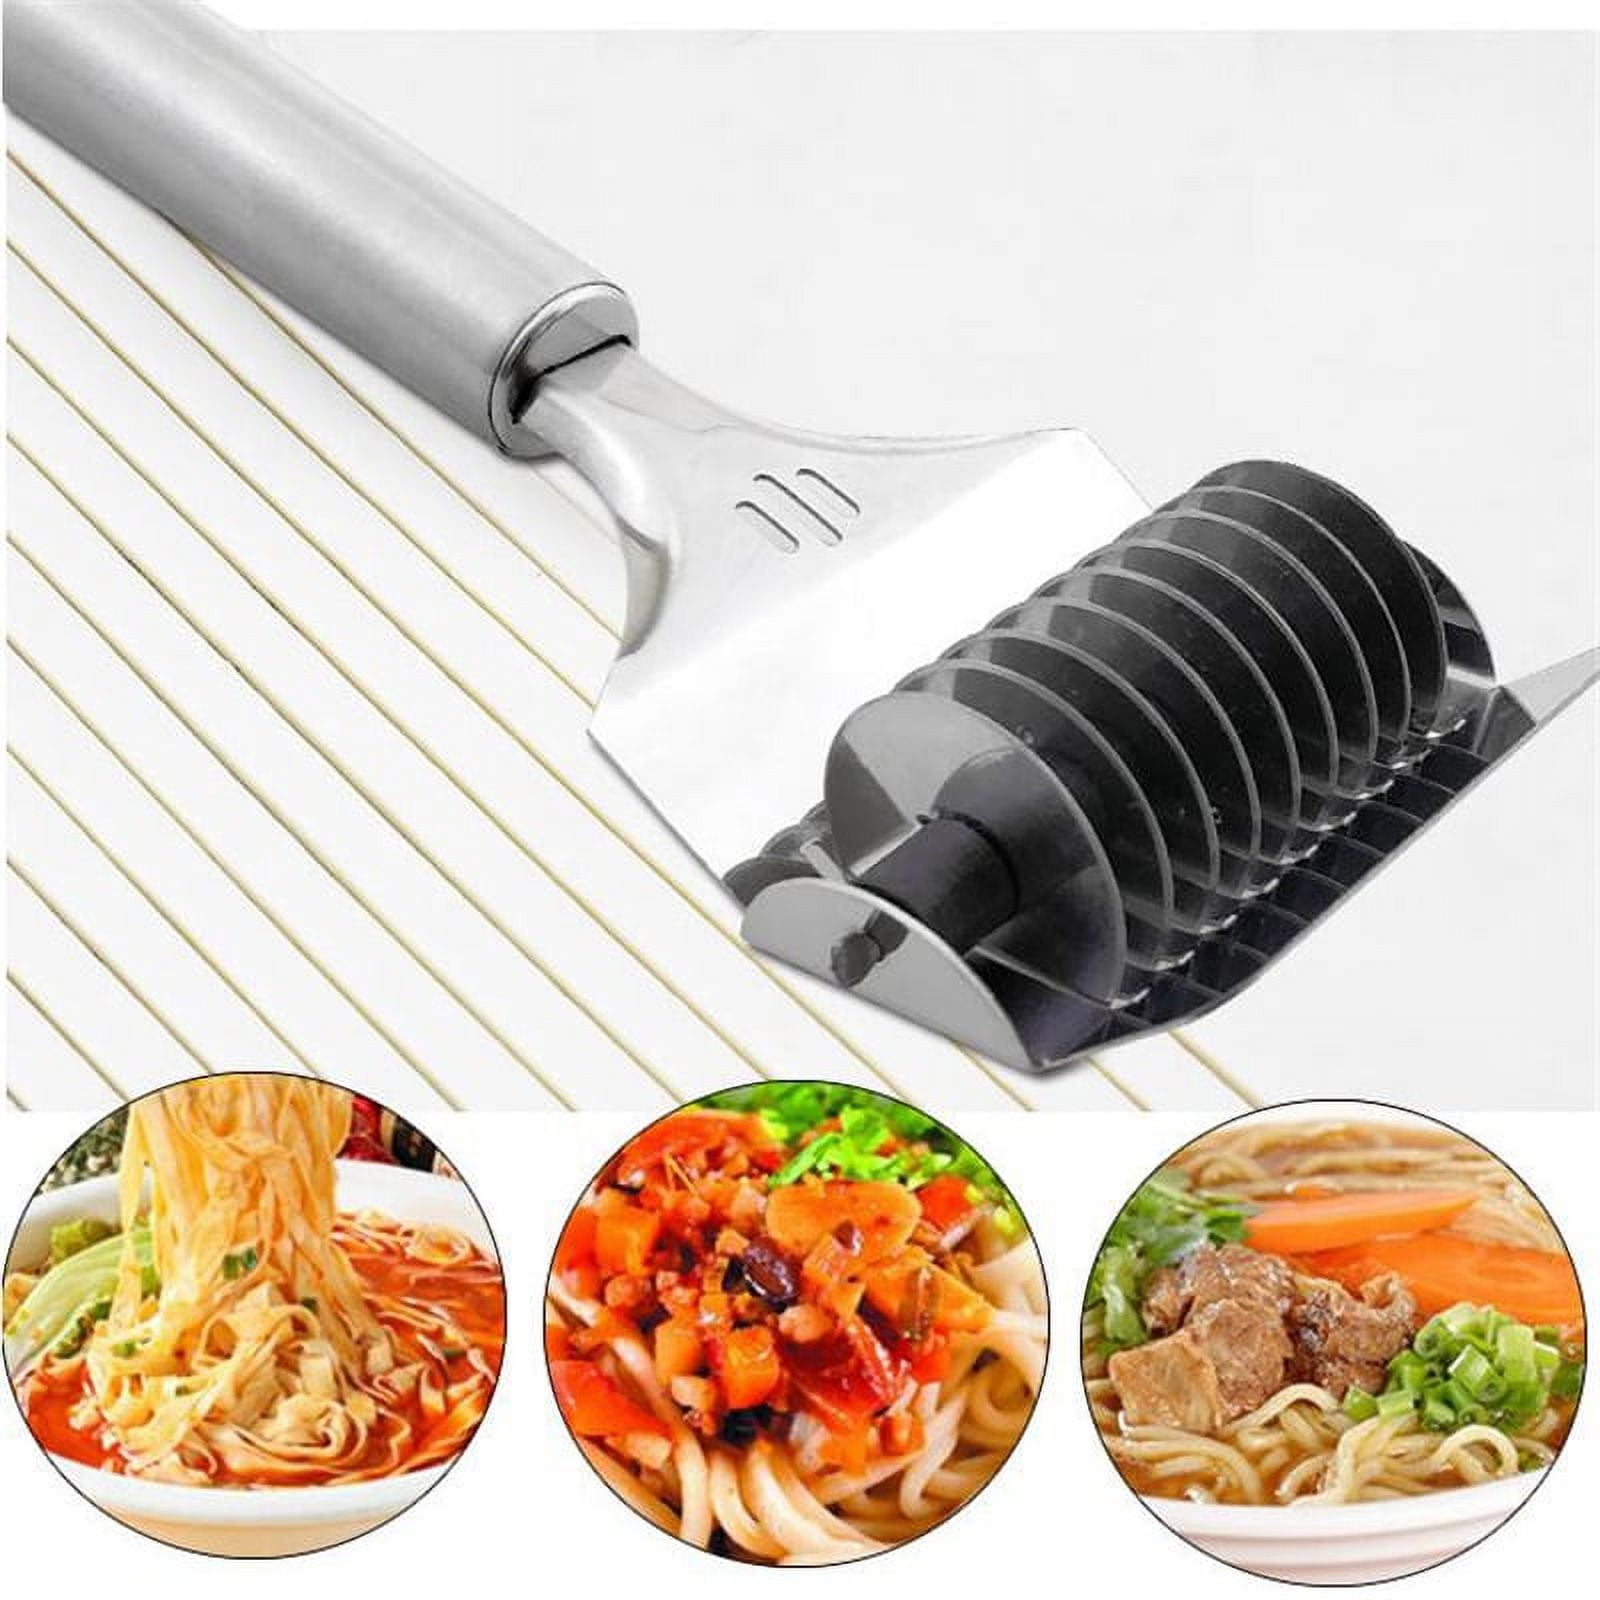 Chainplus 1PCS Stainless Steel Pasta Noodle Cutter Pasta Spaghetti